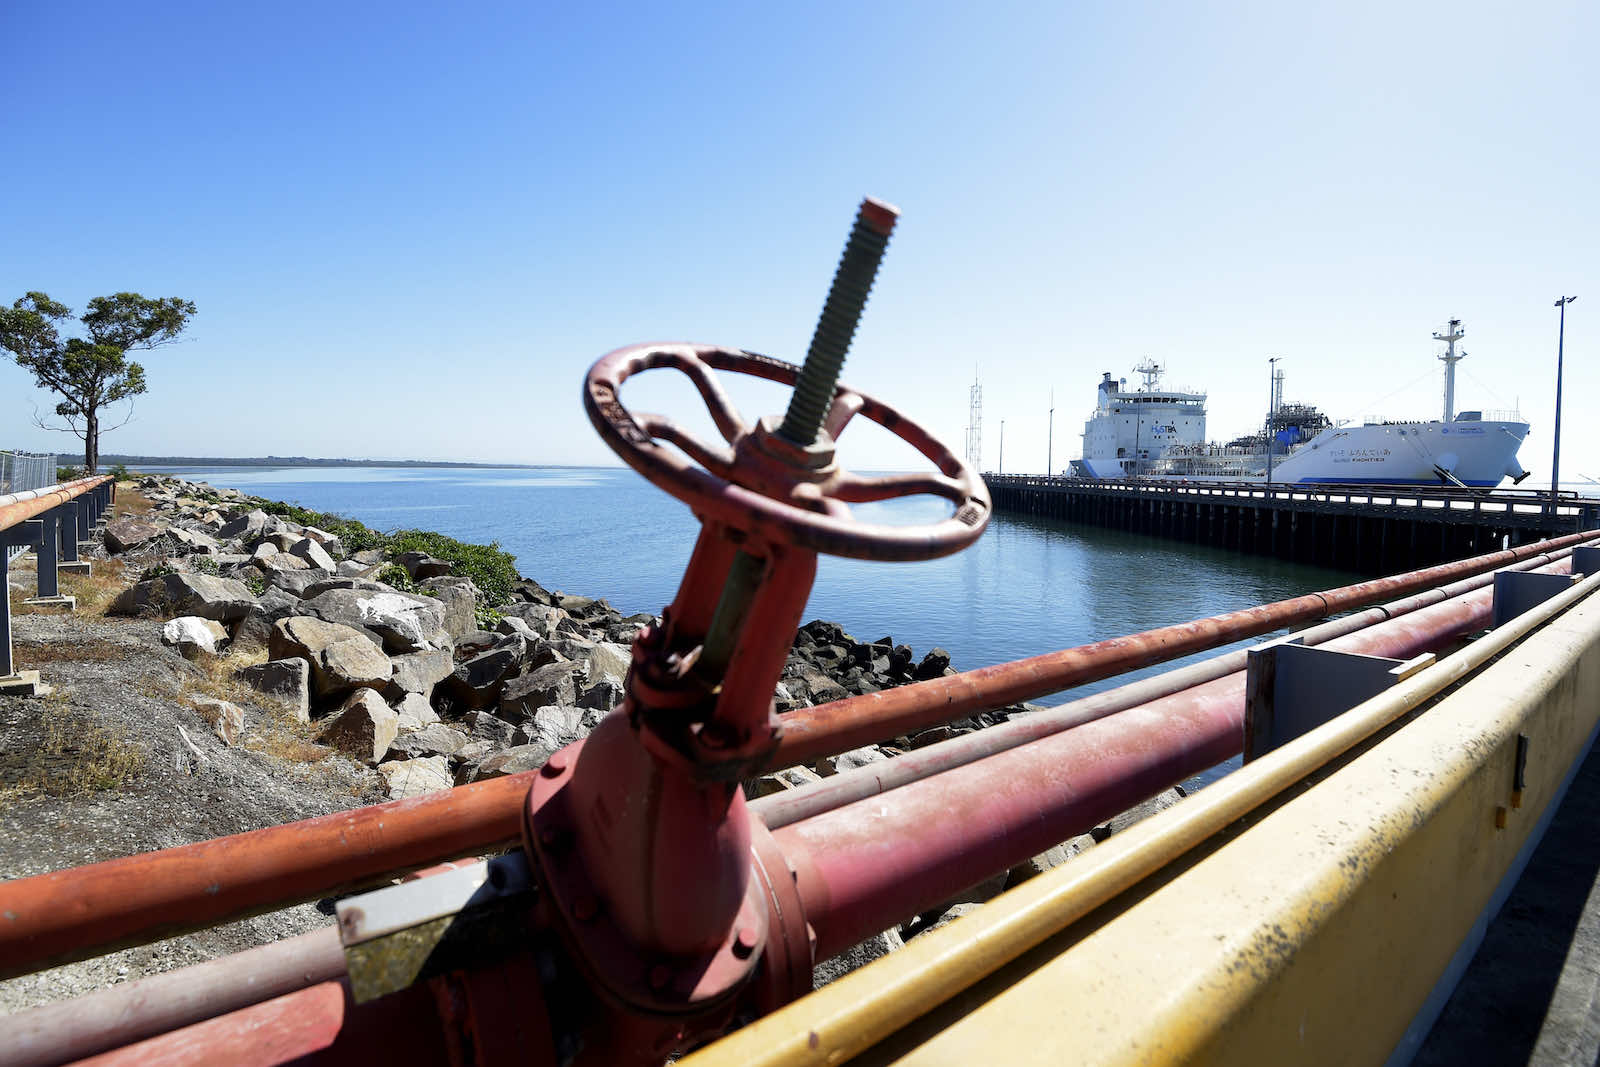 The Suiso Frontier liquid hydrogen carrier moored at the Port of Hastings in Victoria, Australia, in January for the first ever liquid hydrogen shipment (Carla Gottgens/Bloomberg via Getty Images)